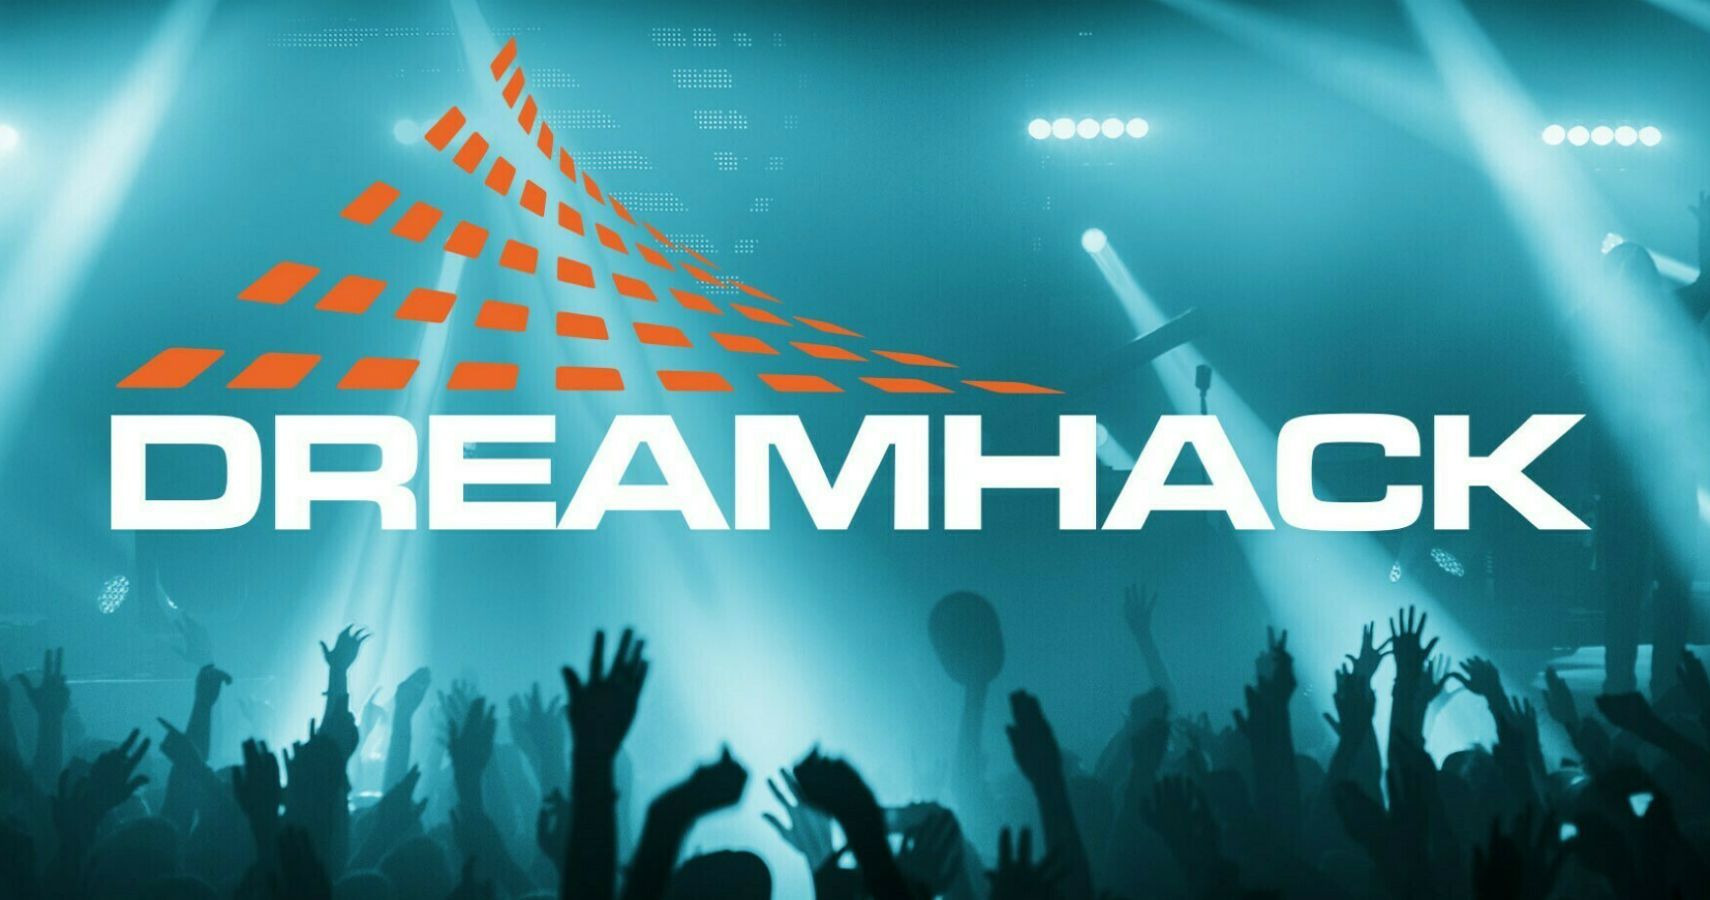 Promotional Material for DreamHack